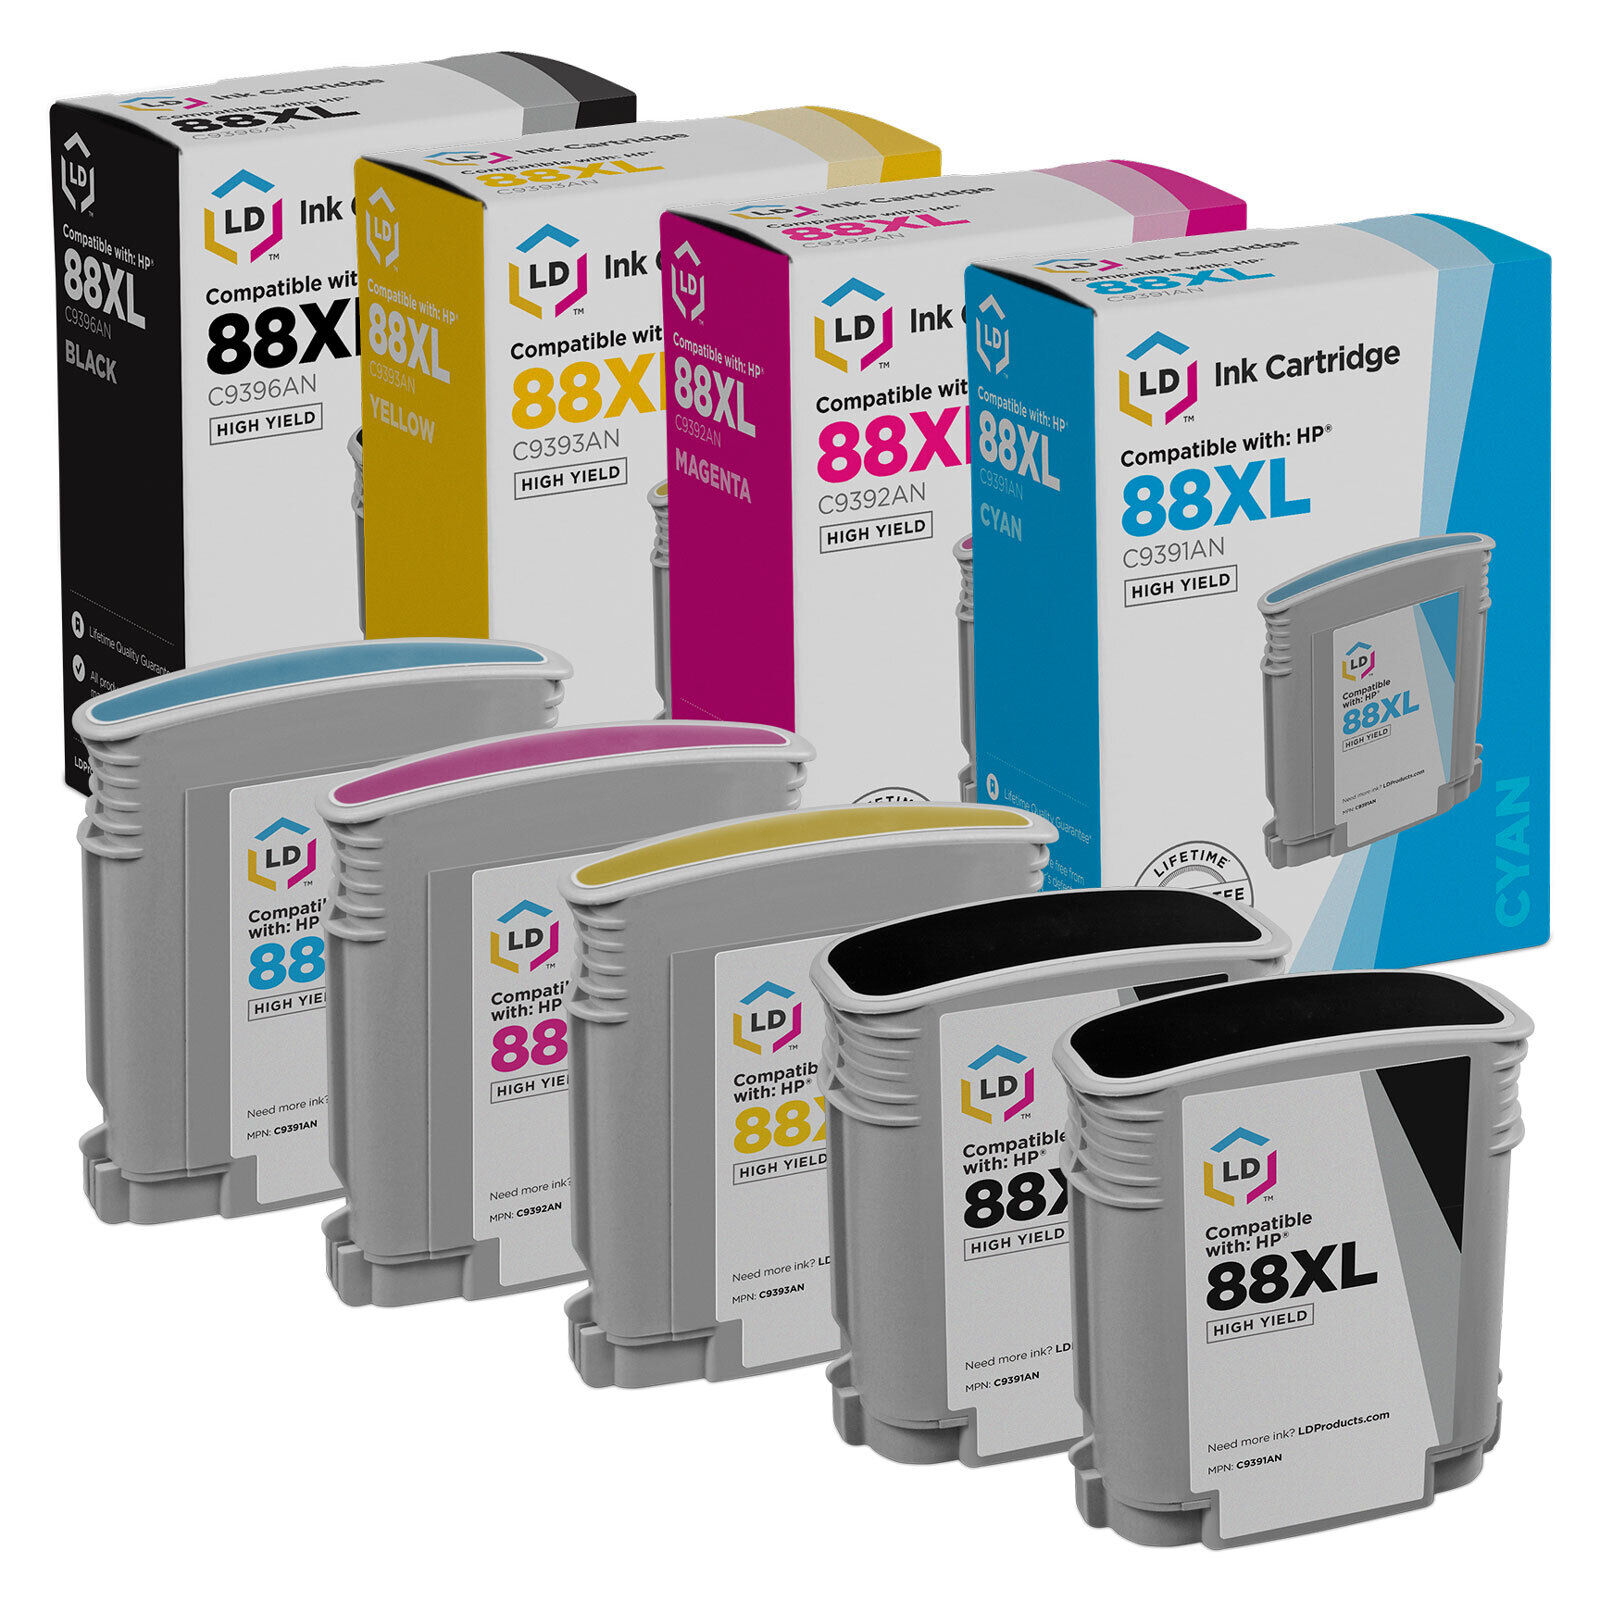 LD Reman Replacements Fits for HP 88XL Set of 5 High Yield Inkjet Cartridges